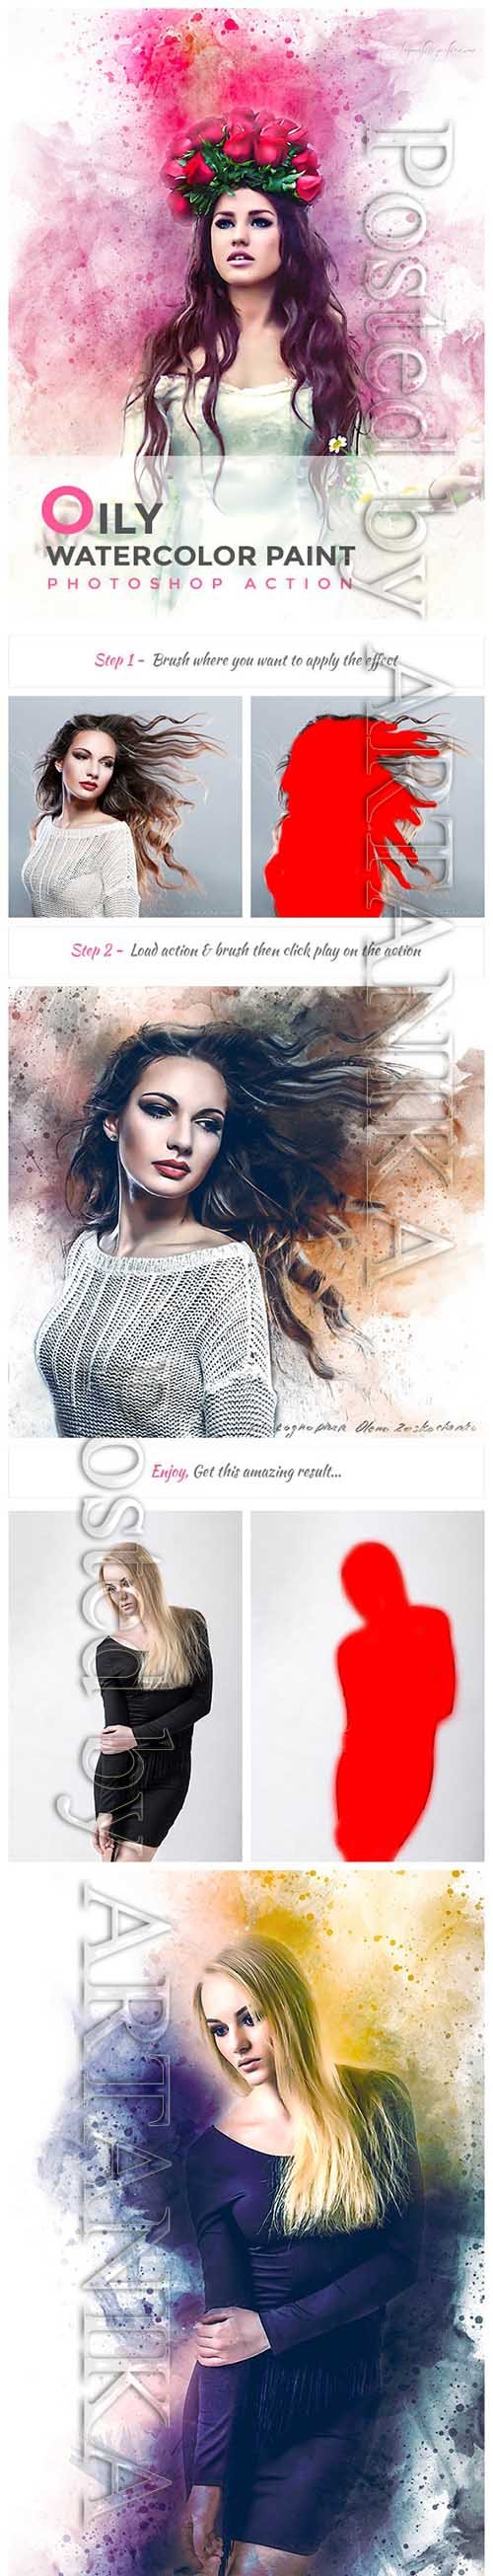 GraphicRiver - Oily Watercolor Paint PS Action 21277840